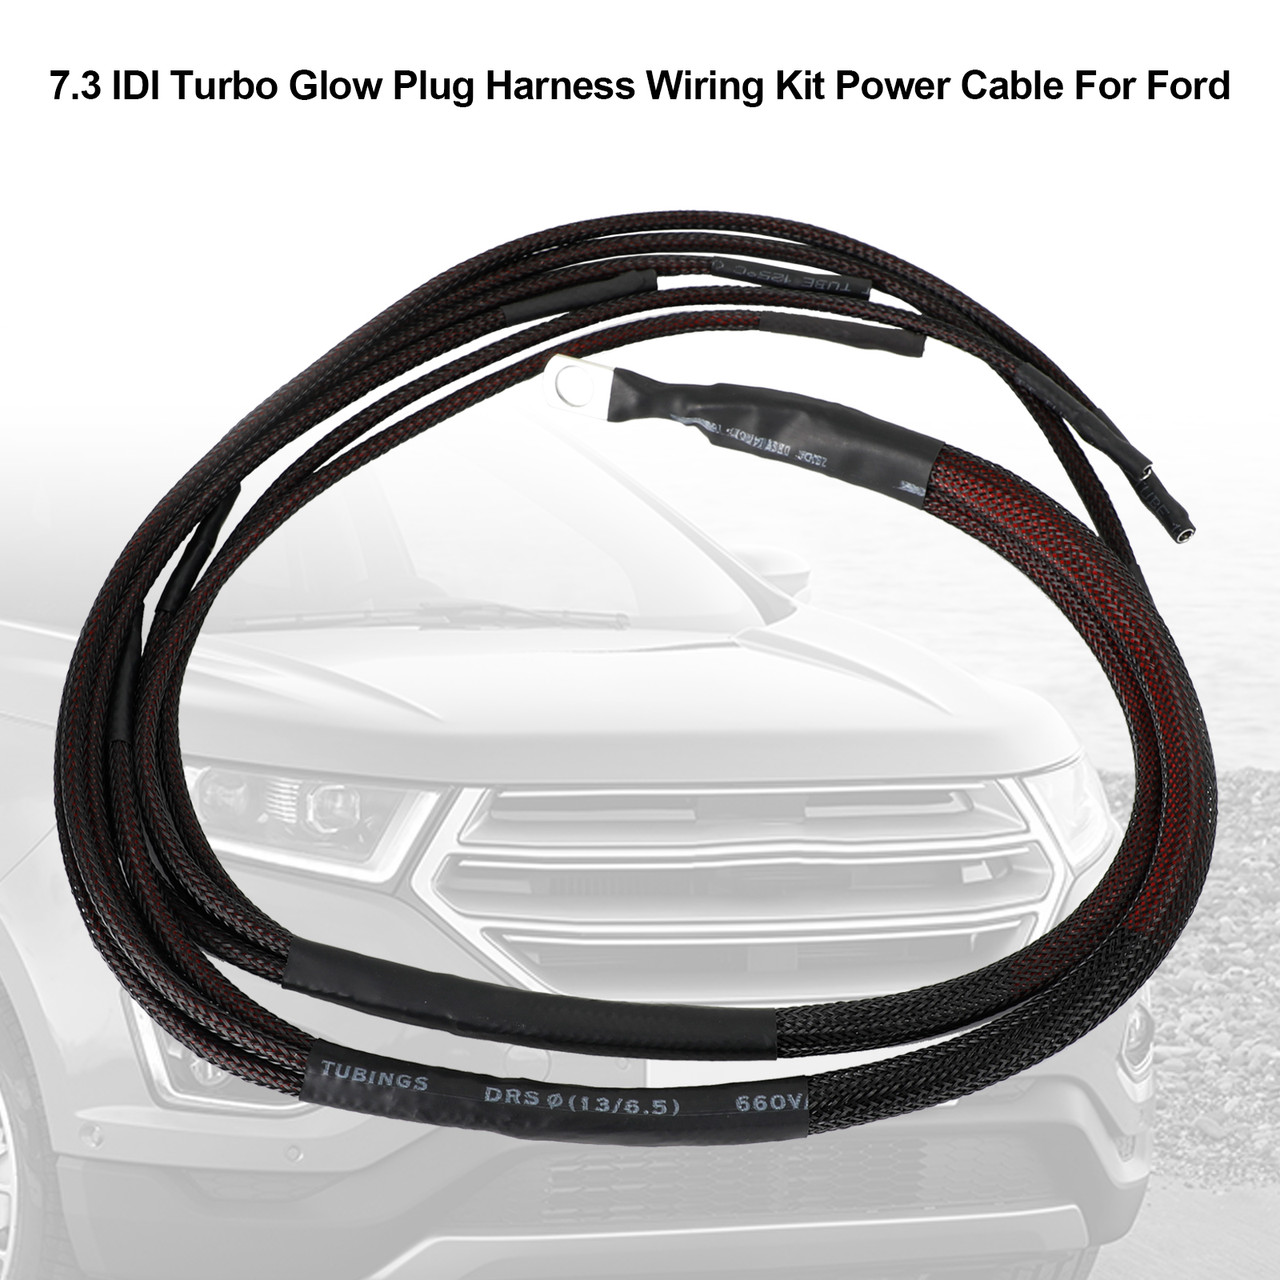 7.3 IDI Turbo Glow Plug Harness Wiring Kit Power Cable For Ford